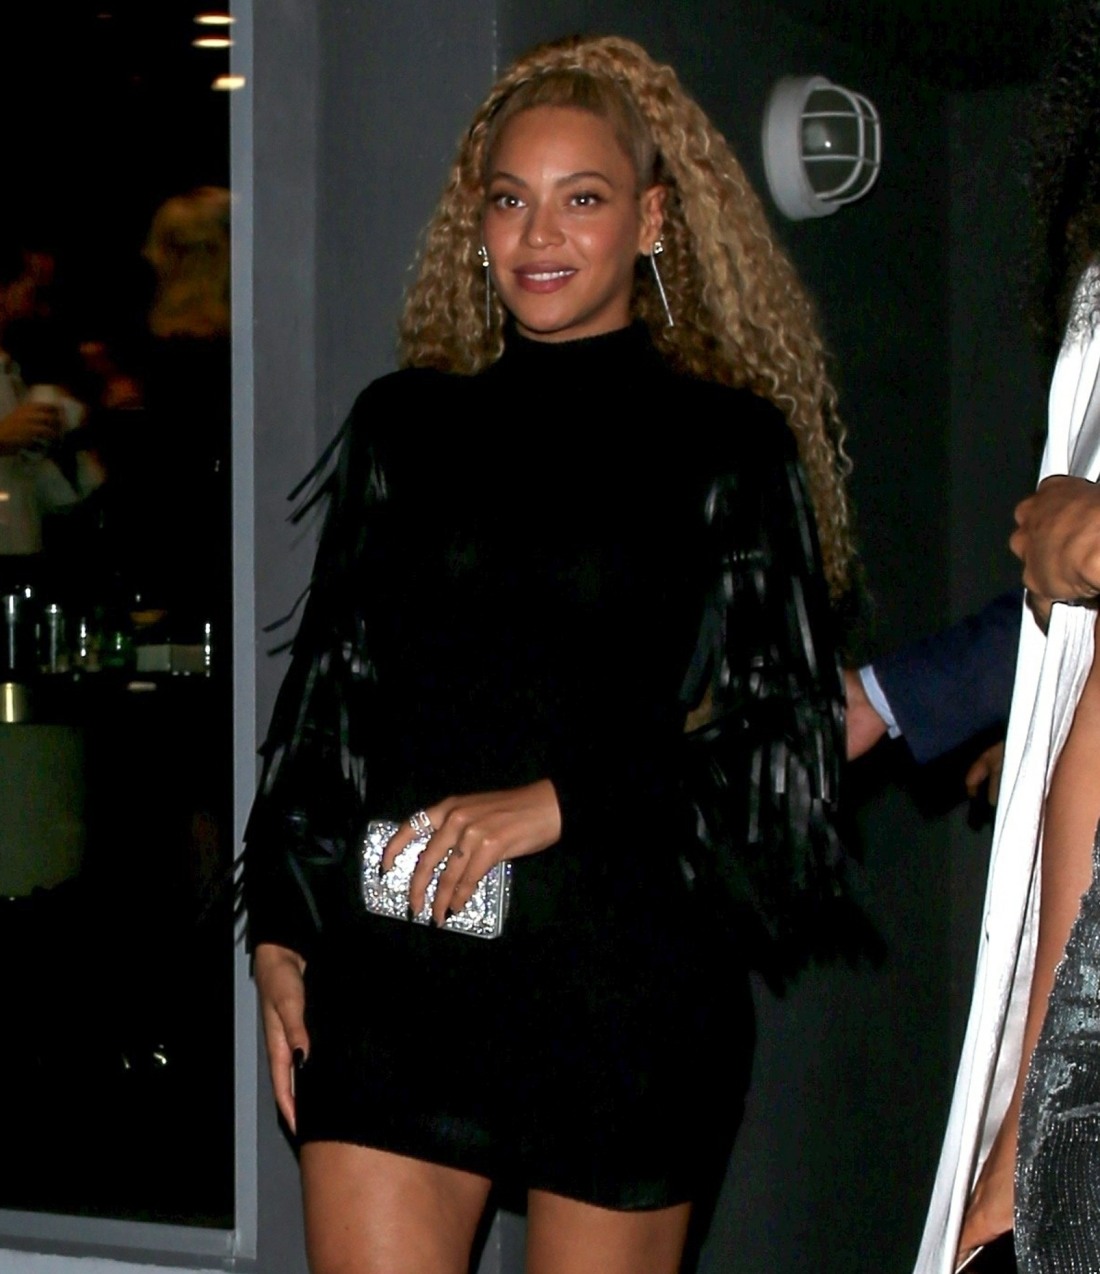 Beyoncé and Kelly Rowland attend the Dundas brand opening in LA